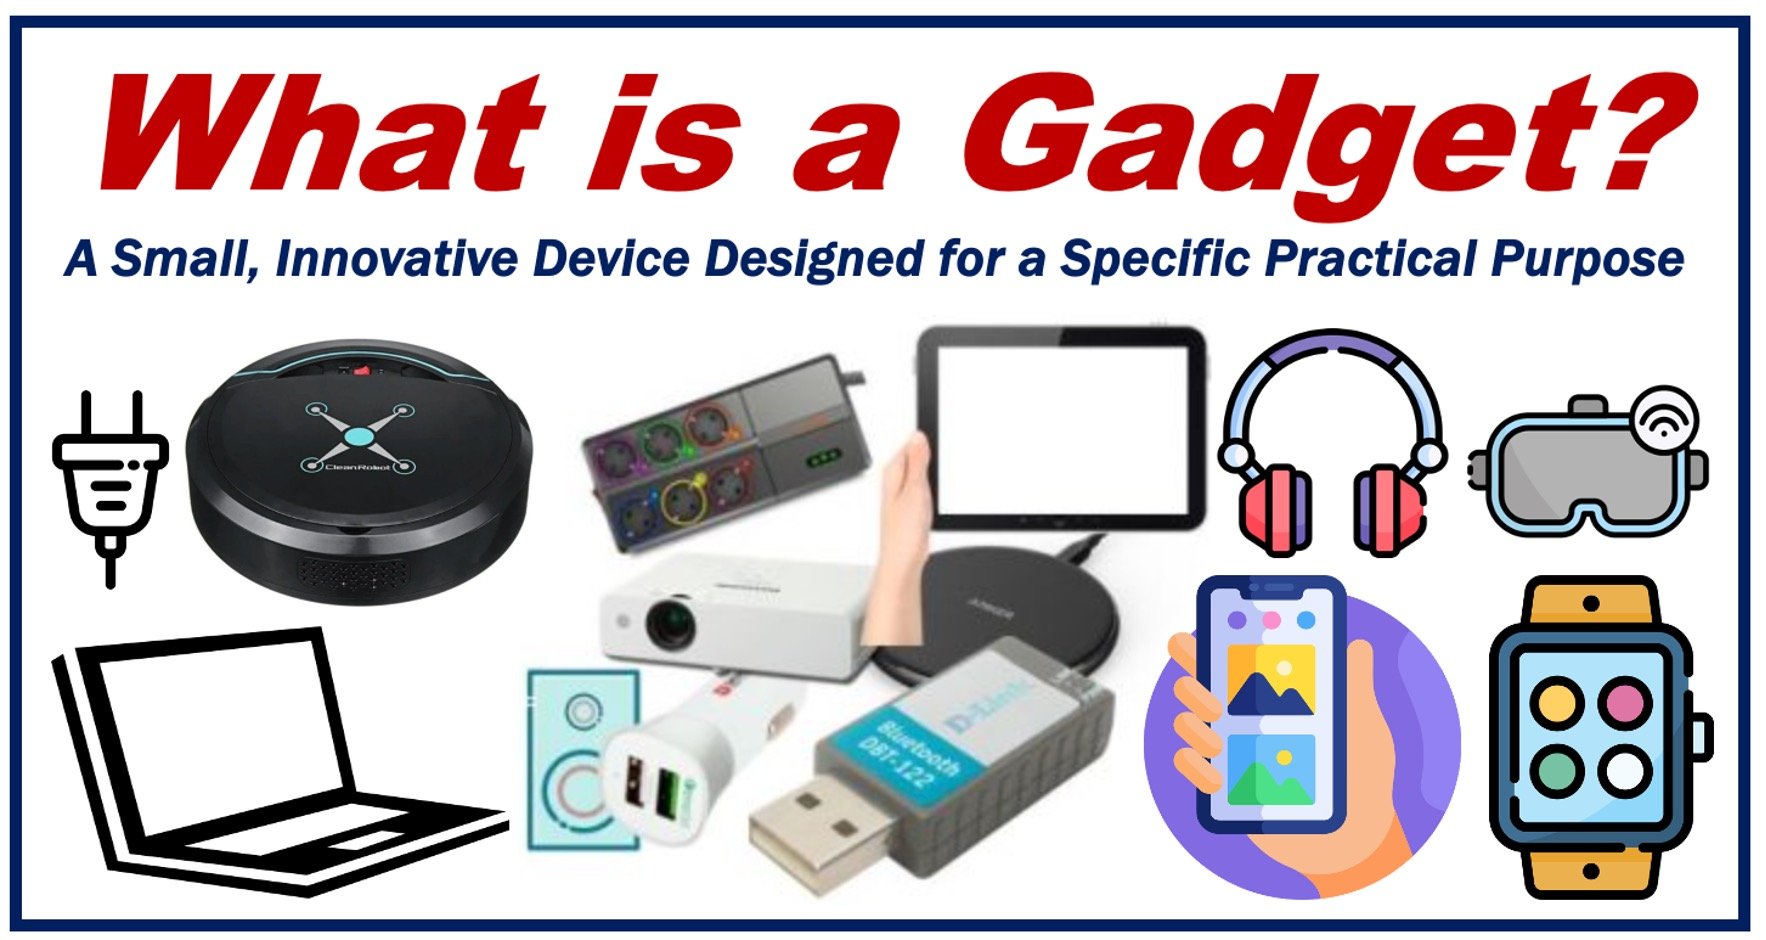 An image explaining what a gadget is